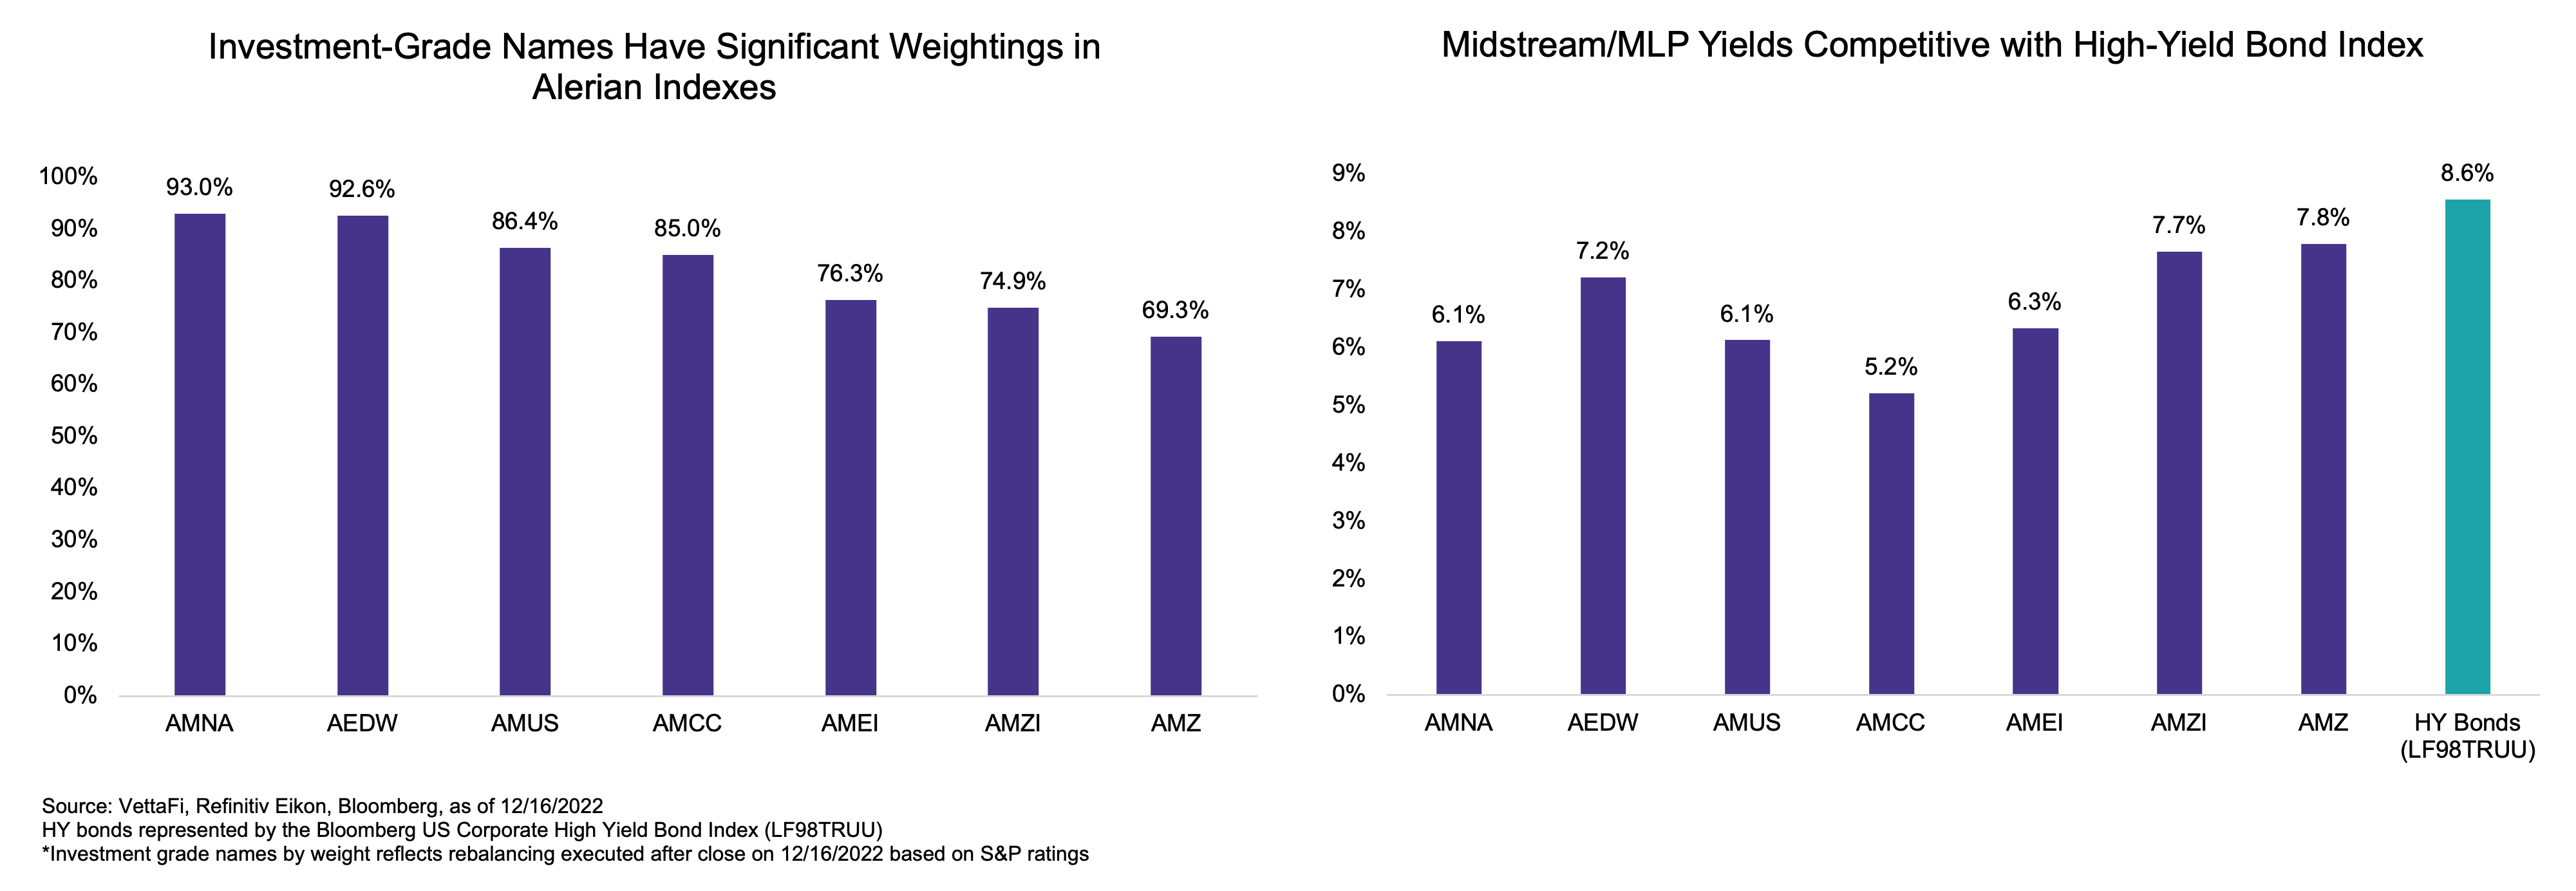 Examining Midstream/MLP Credit Ratings and Yields 